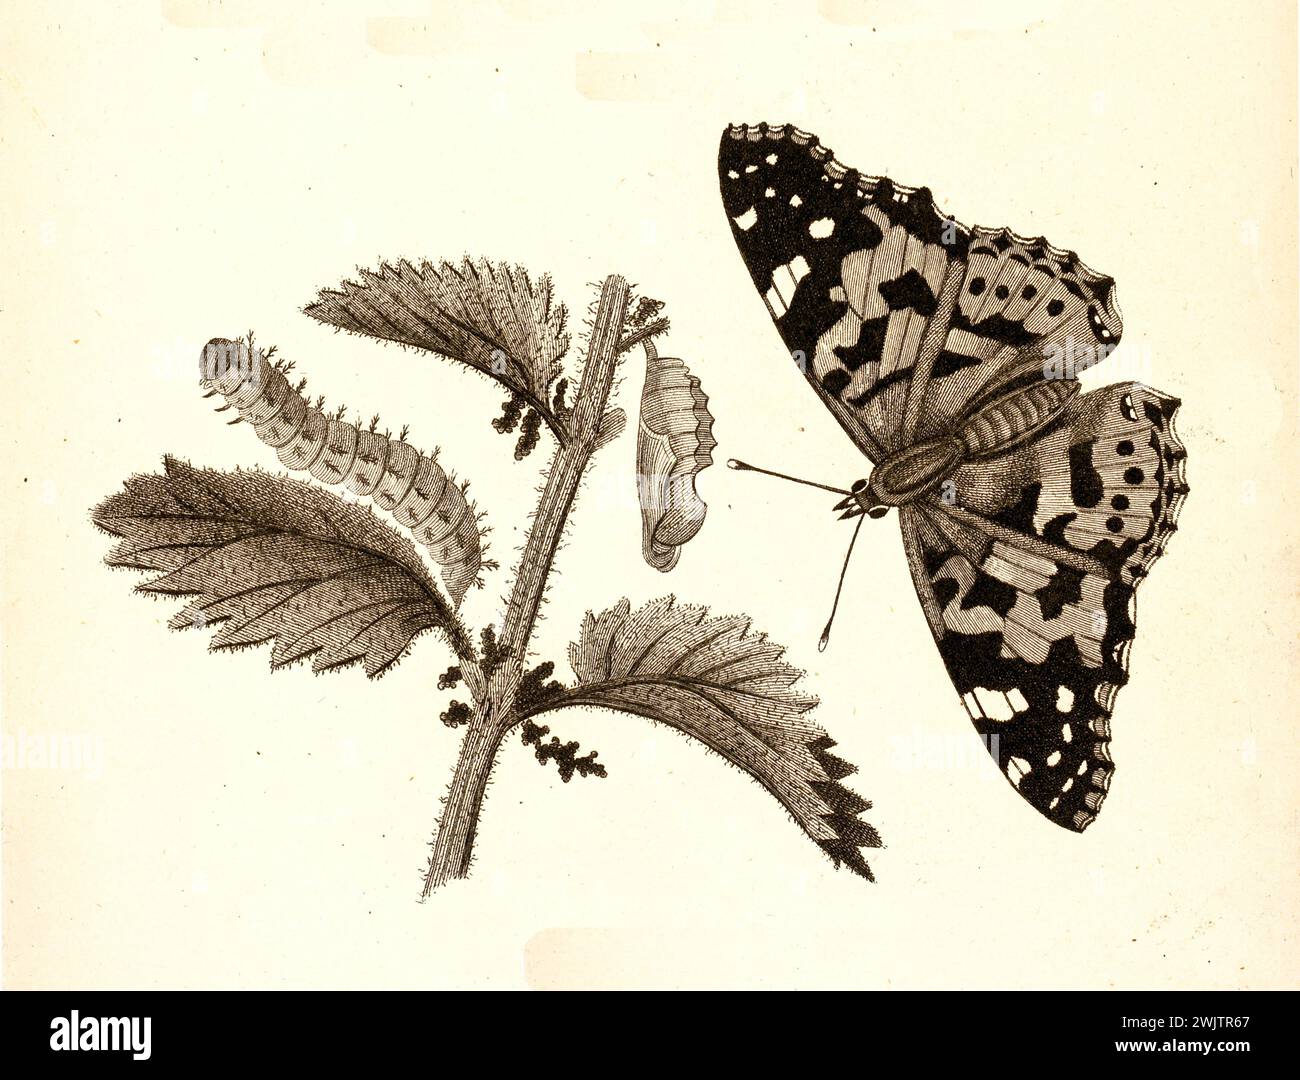 Old engraved illustration of Butterfly pupation on Nettle. Created by George Shaw, published in Zoological Lectures, London, 1809 Stock Photo